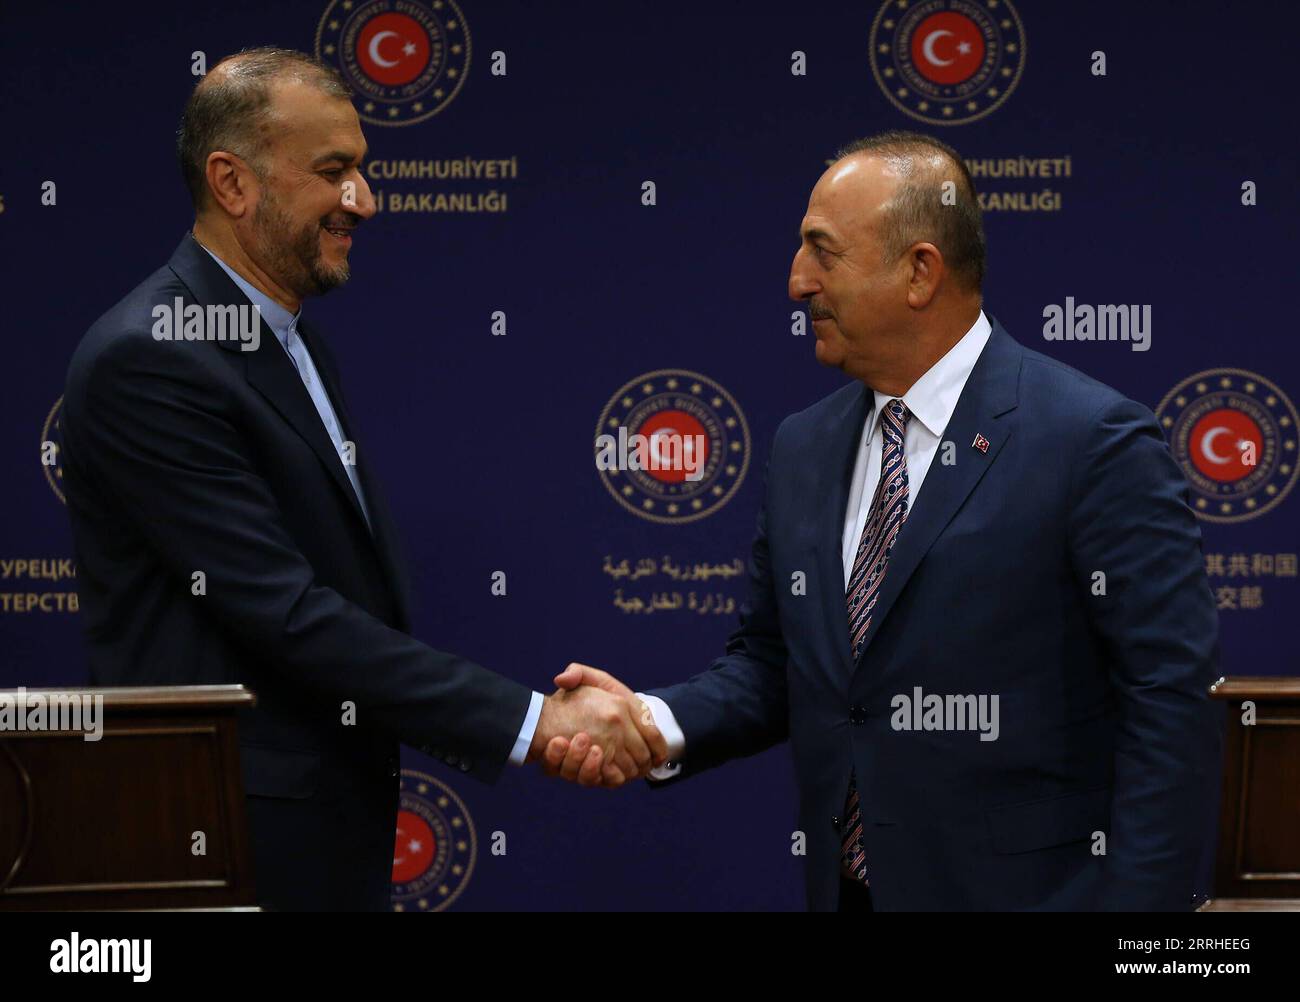 220627 -- ANKARA, June 27, 2022 -- Turkish Foreign Minister Mevlut Cavusoglu R and Iranian Foreign Minister Hossein Amir-Abdollahian shake hands at a joint press conference in Ankara, Turkey, on June 27, 2022. Turkey is against the unilateral sanctions on Iran, Turkish Foreign Minister Mevlut Cavusoglu said on Monday, voicing hopes for the nuclear deal to be restored. Photo by /Xinhua TURKEY-ANKARA-IRAN-FM-VISIT MustafaxKaya PUBLICATIONxNOTxINxCHN Stock Photo